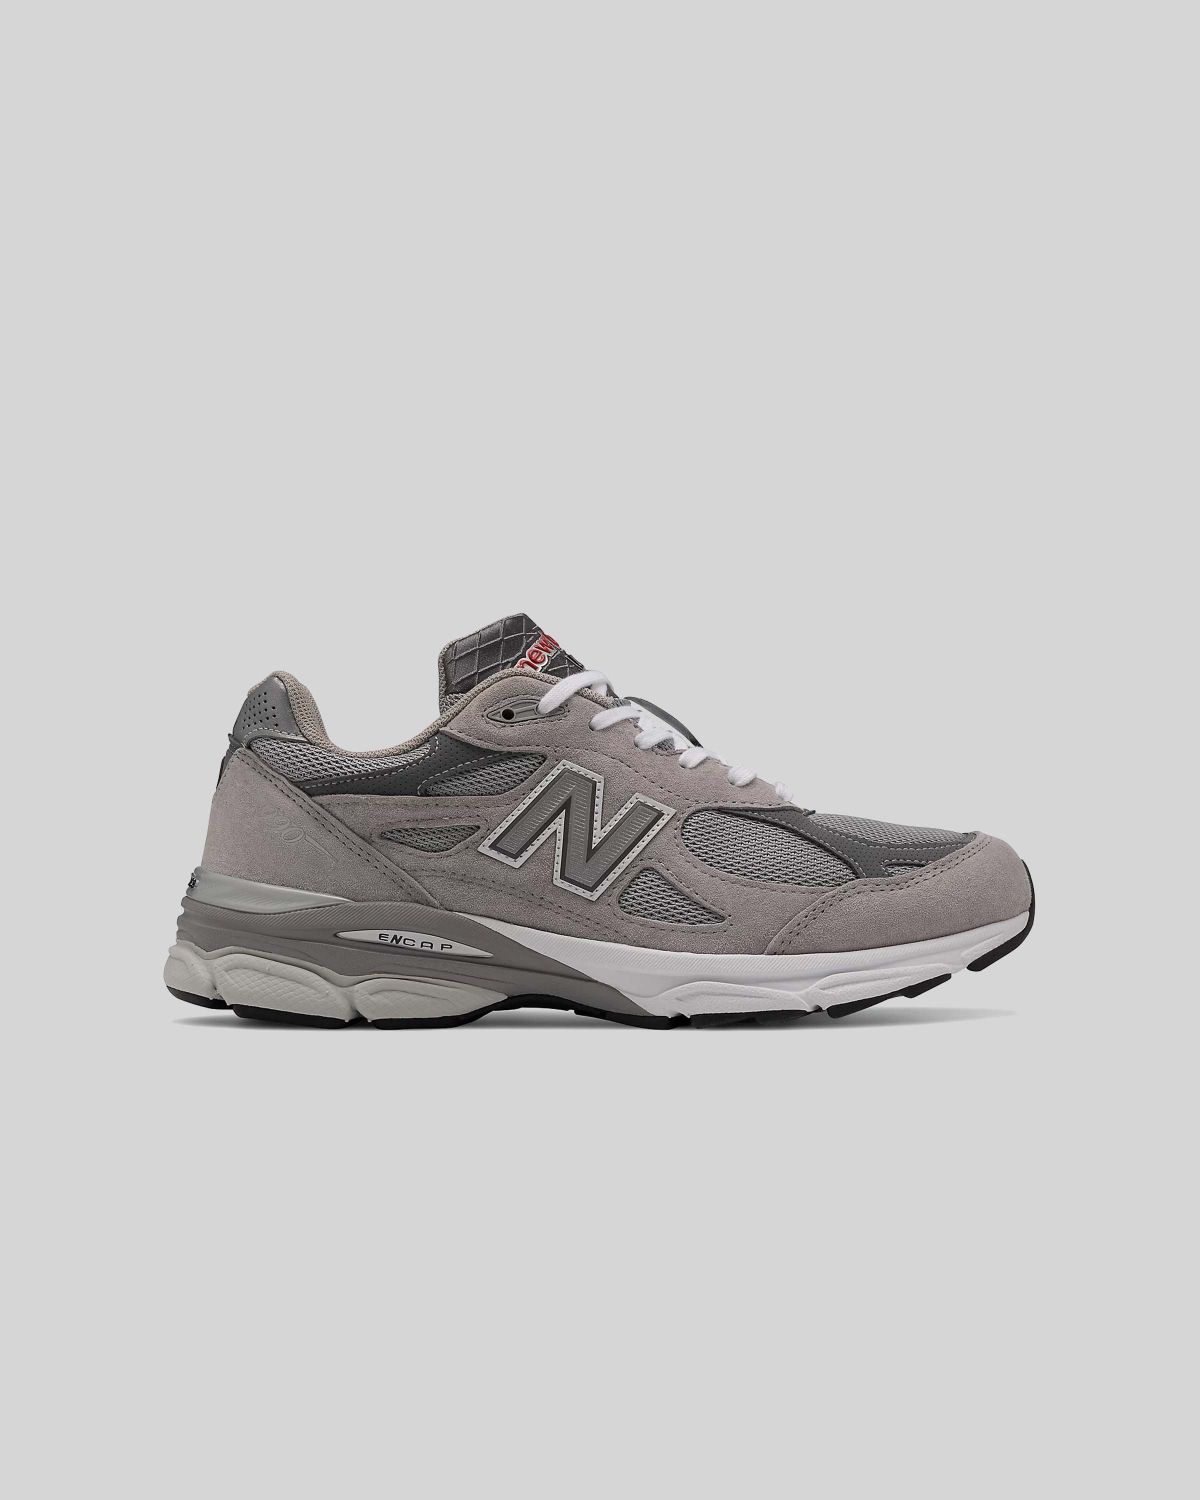 New Balance – M990GY3 Grey - Low Top Sneakers - Grey - Image 5